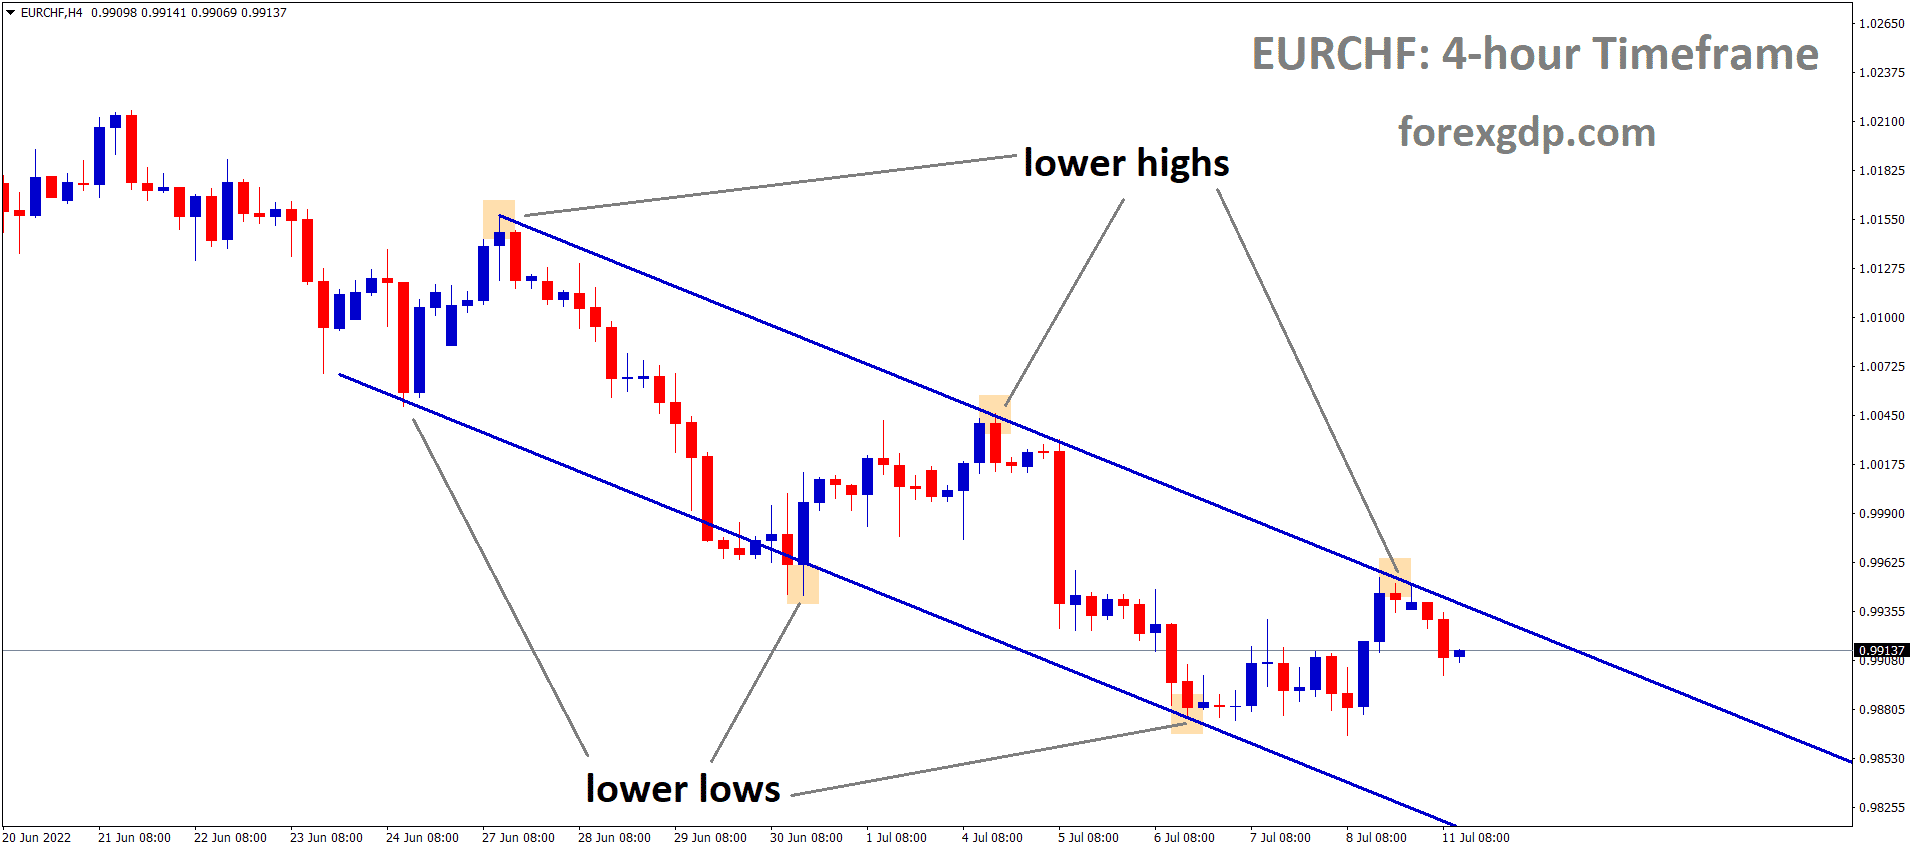 EURCHF is moving in the Descending channel and the Market has fallen from the Lower high area of the channel.